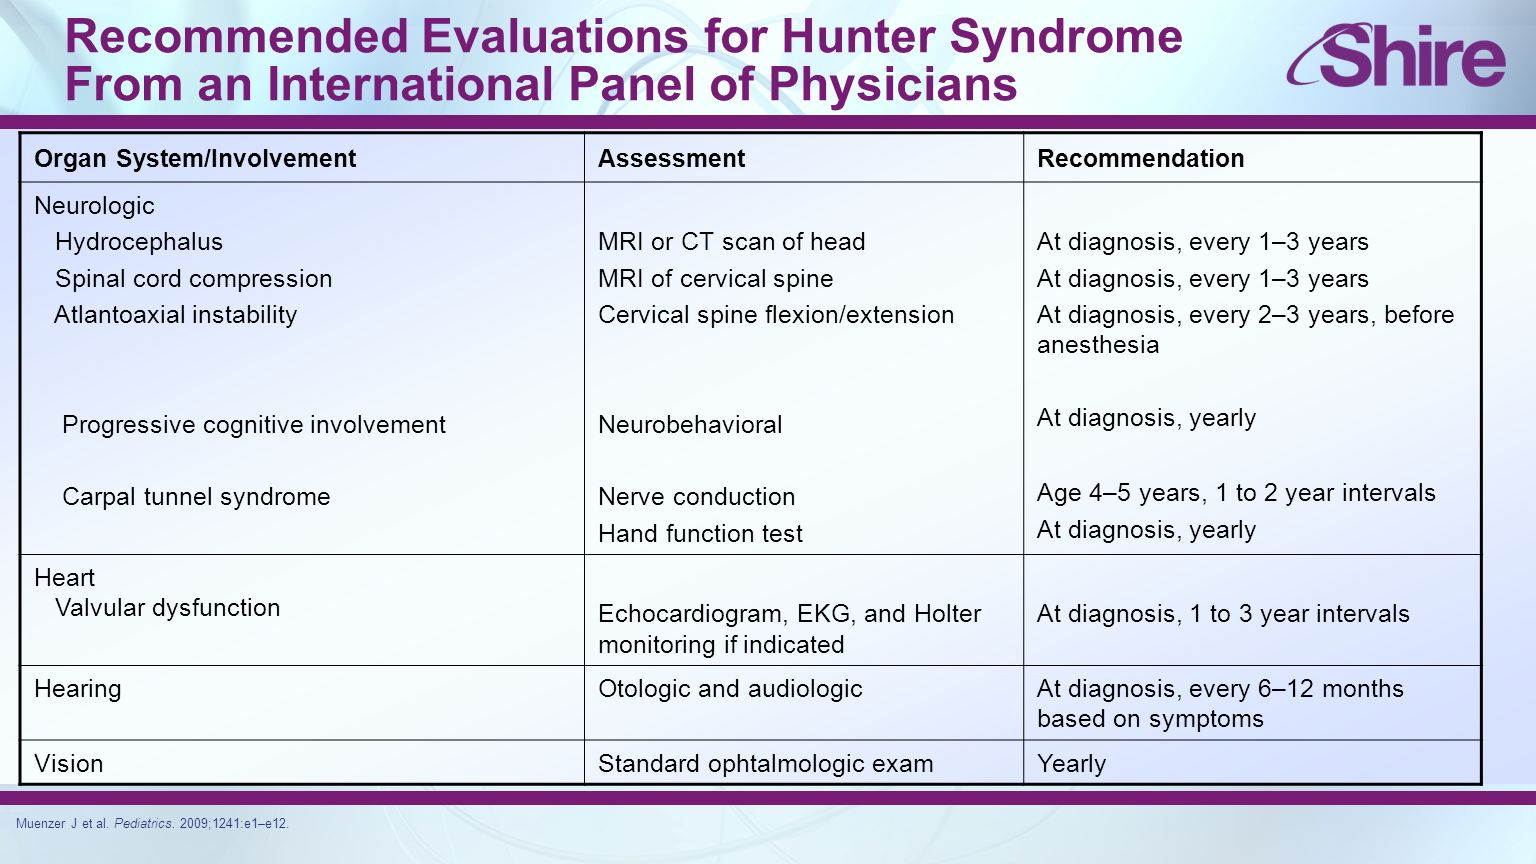 Recommended Evaluations for Hunter Syndrome From an International Panel of Physicians Organ System/InvolvementAssessmentRecommendation Neurologic Hydrocephalus Spinal cord compression Atlantoaxial instability Progressive cognitive involvement Carpal tunnel syndrome MRI or CT scan of head MRI of cervical spine Cervical spine flexion/extension Neurobehavioral Nerve conduction Hand function test At diagnosis, every 1–3 years At diagnosis, every 2–3 years, before anesthesia At diagnosis, yearly Age 4–5 years, 1 to 2 year intervals At diagnosis, yearly Heart Valvular dysfunction Echocardiogram, EKG, and Holter monitoring if indicated At diagnosis, 1 to 3 year intervals HearingOtologic and audiologicAt diagnosis, every 6–12 months based on symptoms VisionStandard ophtalmologic examYearly Muenzer J et al.